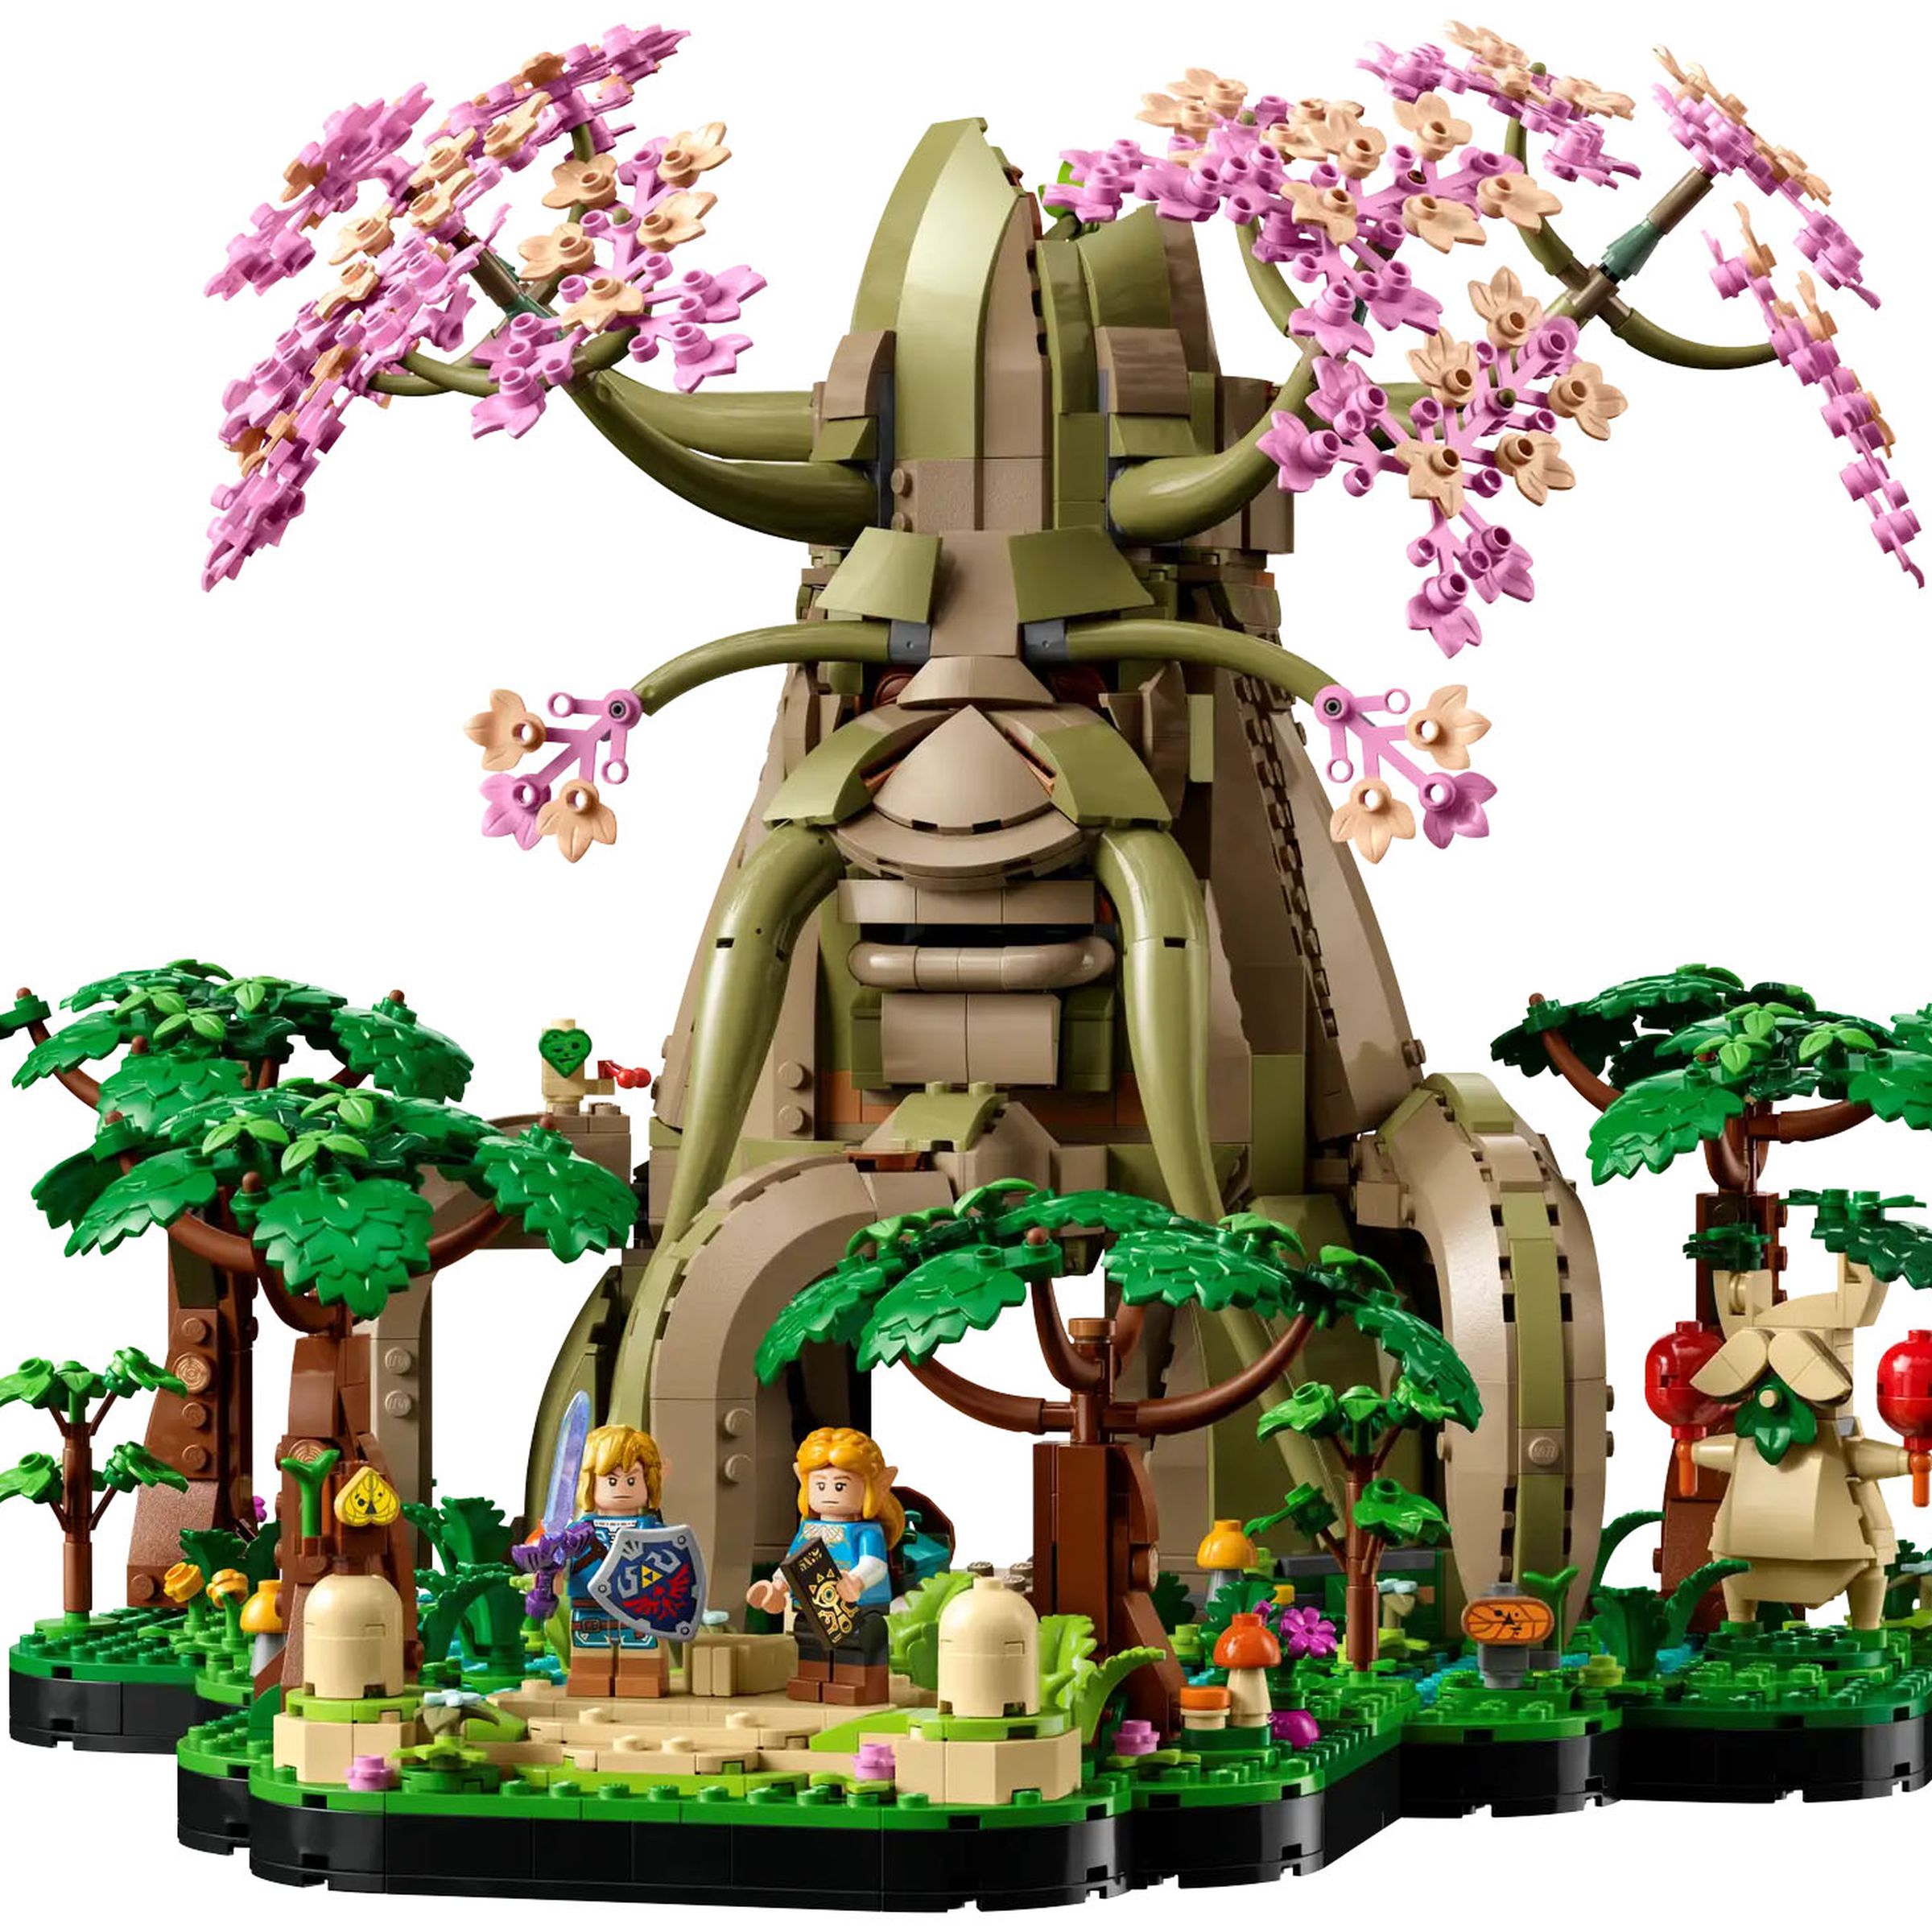 The Great Deku Tree from Breath of the Wild in Lego form.